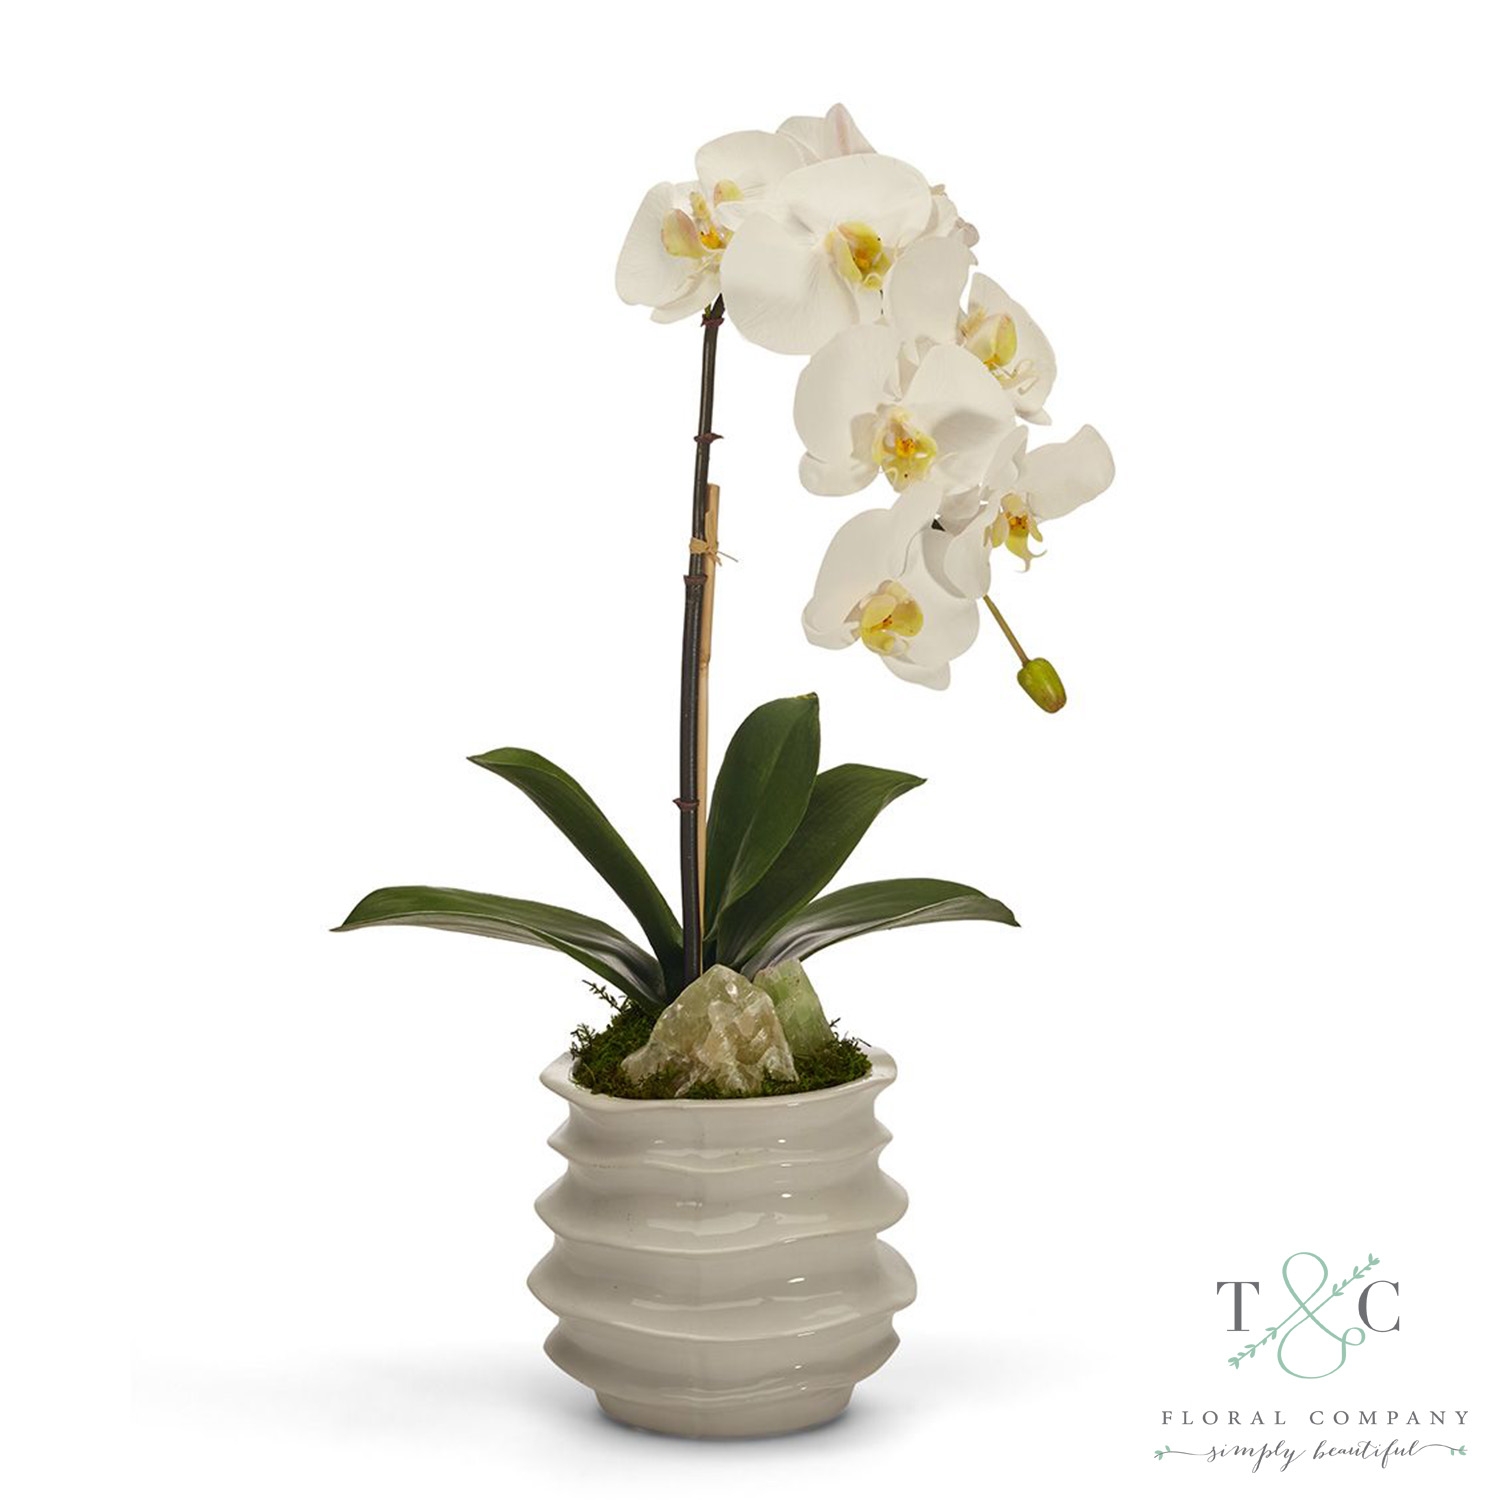 White Orchid in White Wavy Pot with Green Calcite - 7L x 7W x 22H Floral Arrangement